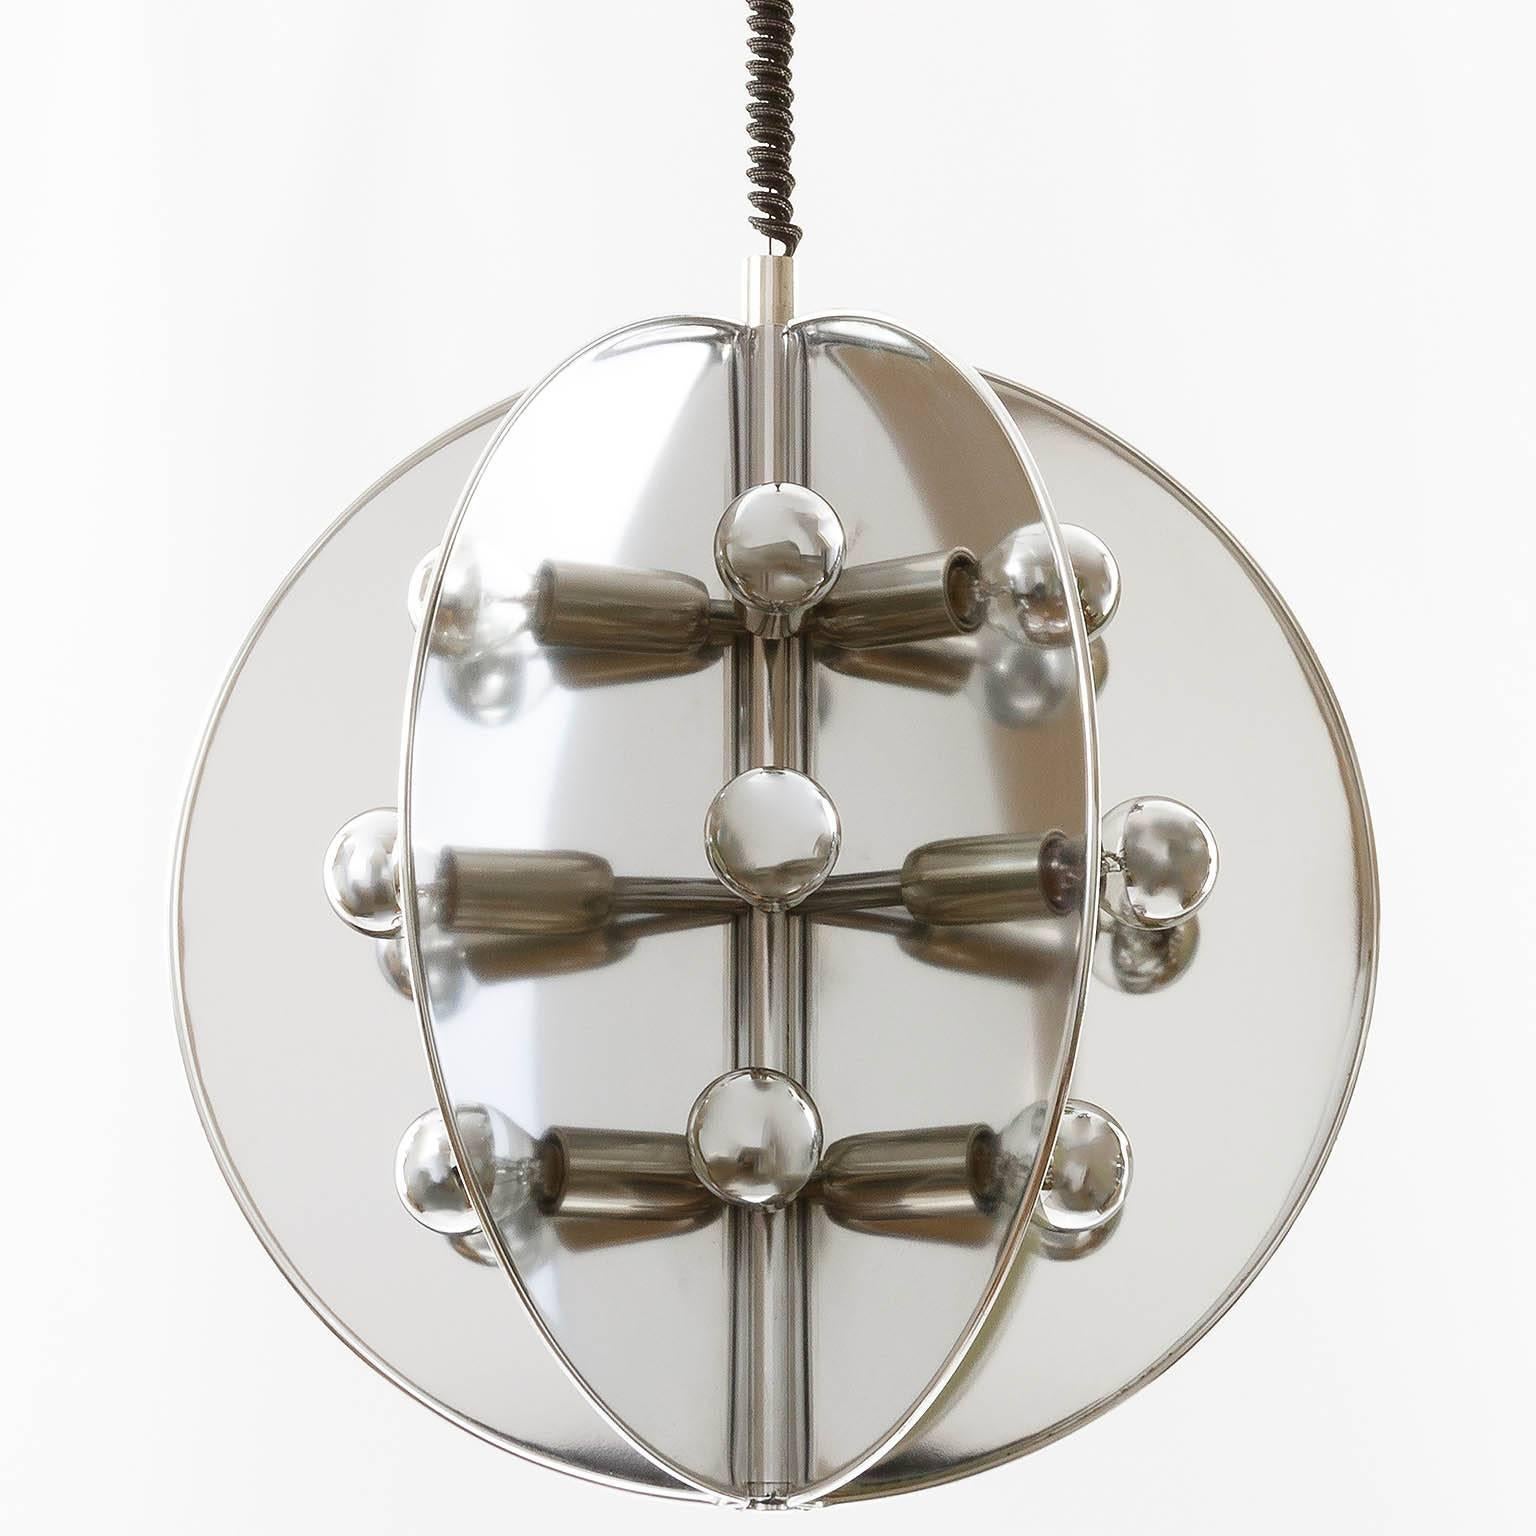 A height adjustable Sputnik or atomium chandelier from Italy. 18 small base bulbs. Works well with half chrome or clear bulbs.

Reduced from $2300.